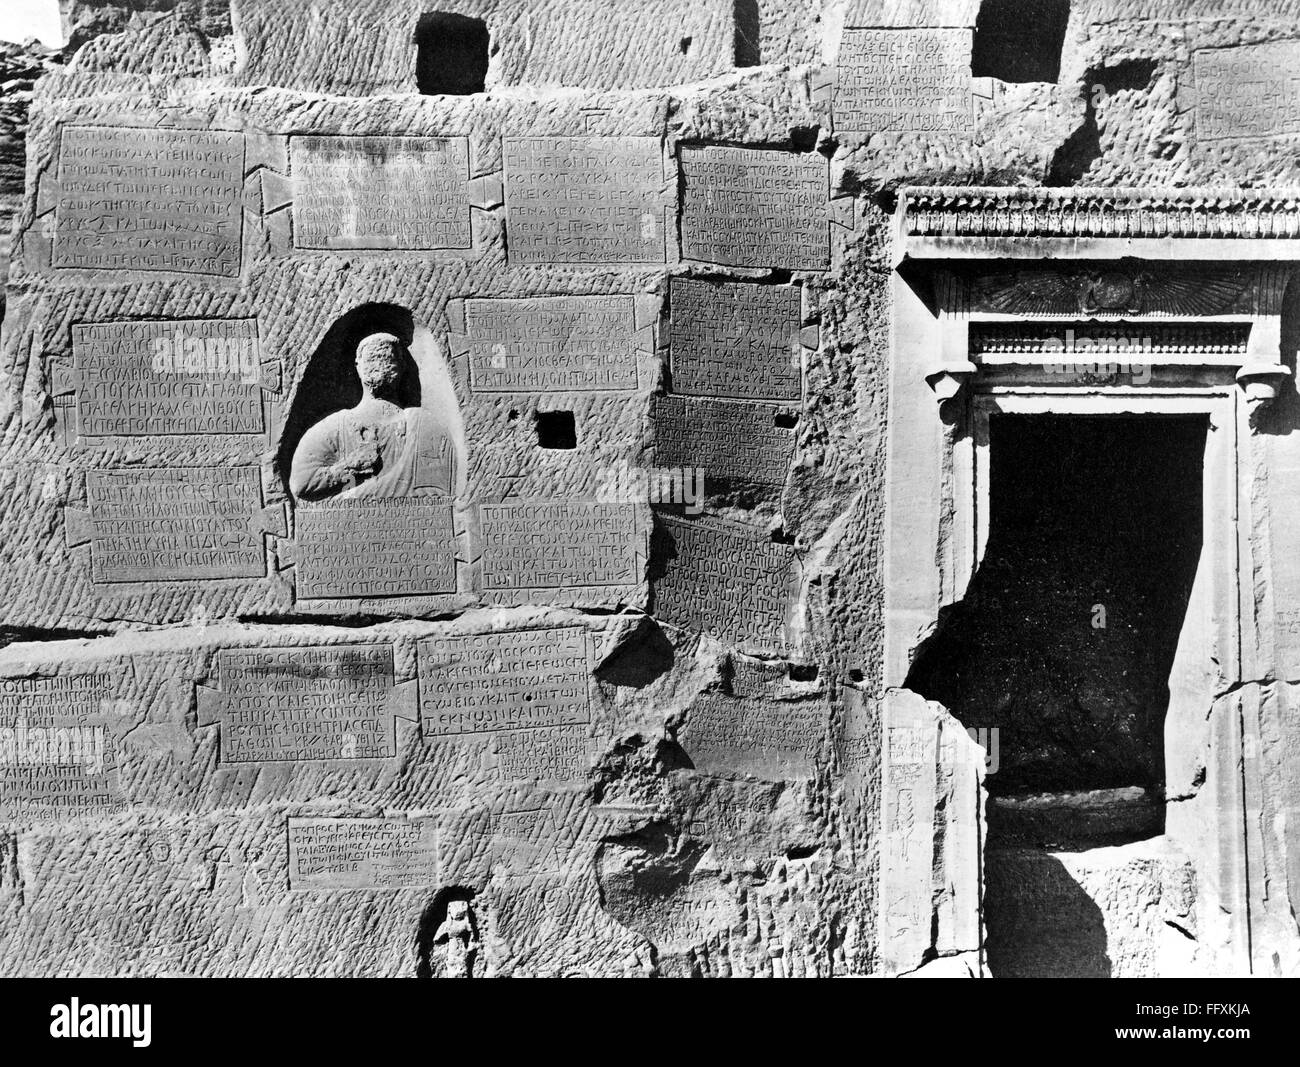 EGYPT: GREEK TABLETS, c1865. /nGreek inscriptions on the side of an ancient Egyptian building. Photograph, c1865. Stock Photo